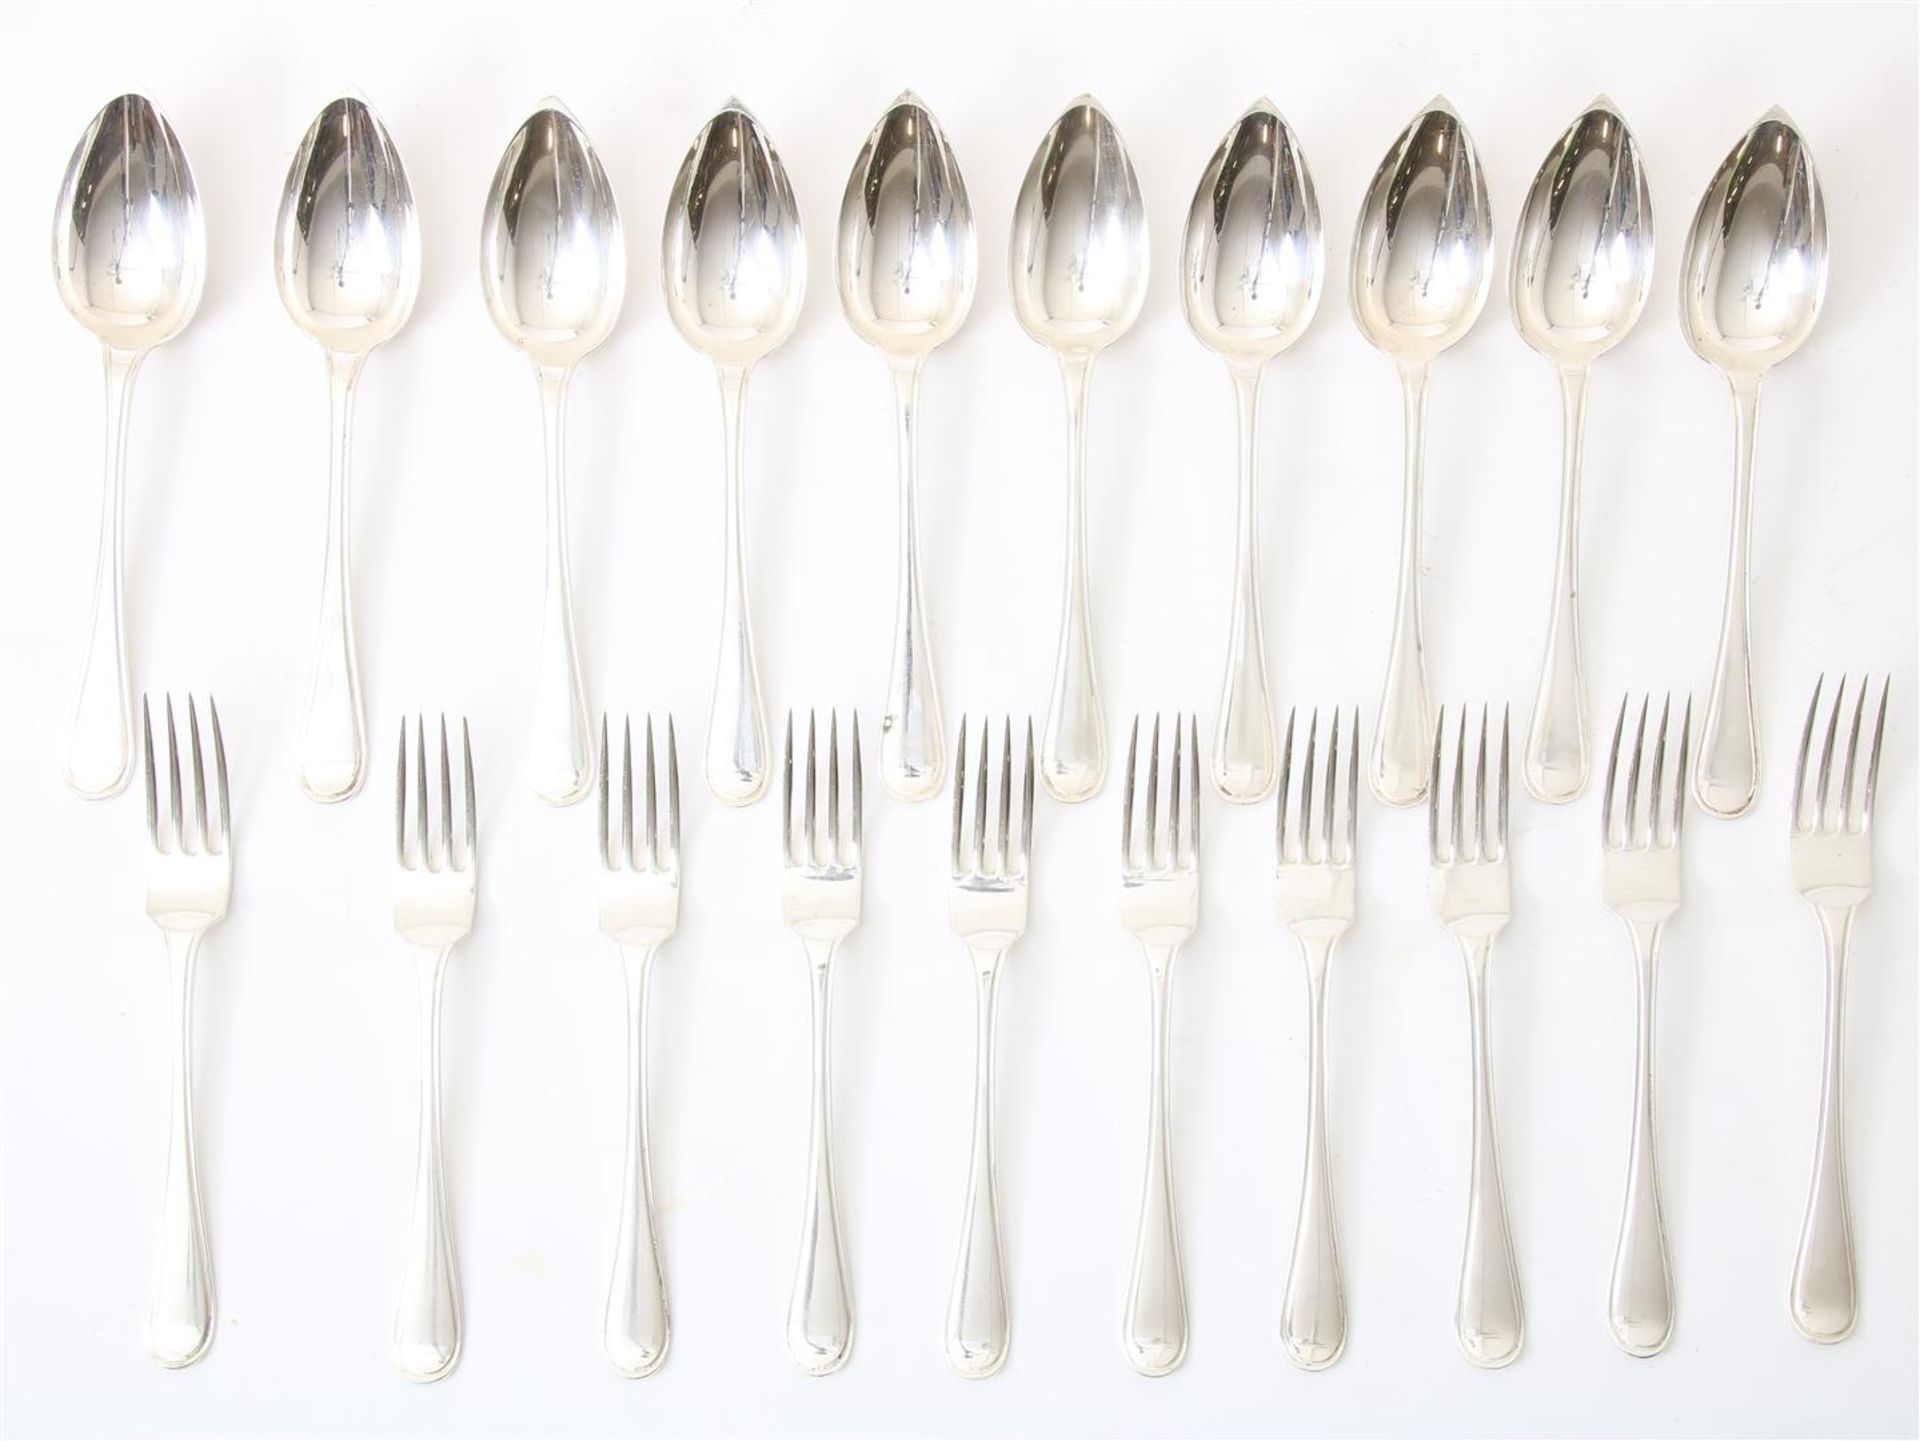 Series of 10 large cutlery pieces, spoons and forks, double fillet, grade 835/000..